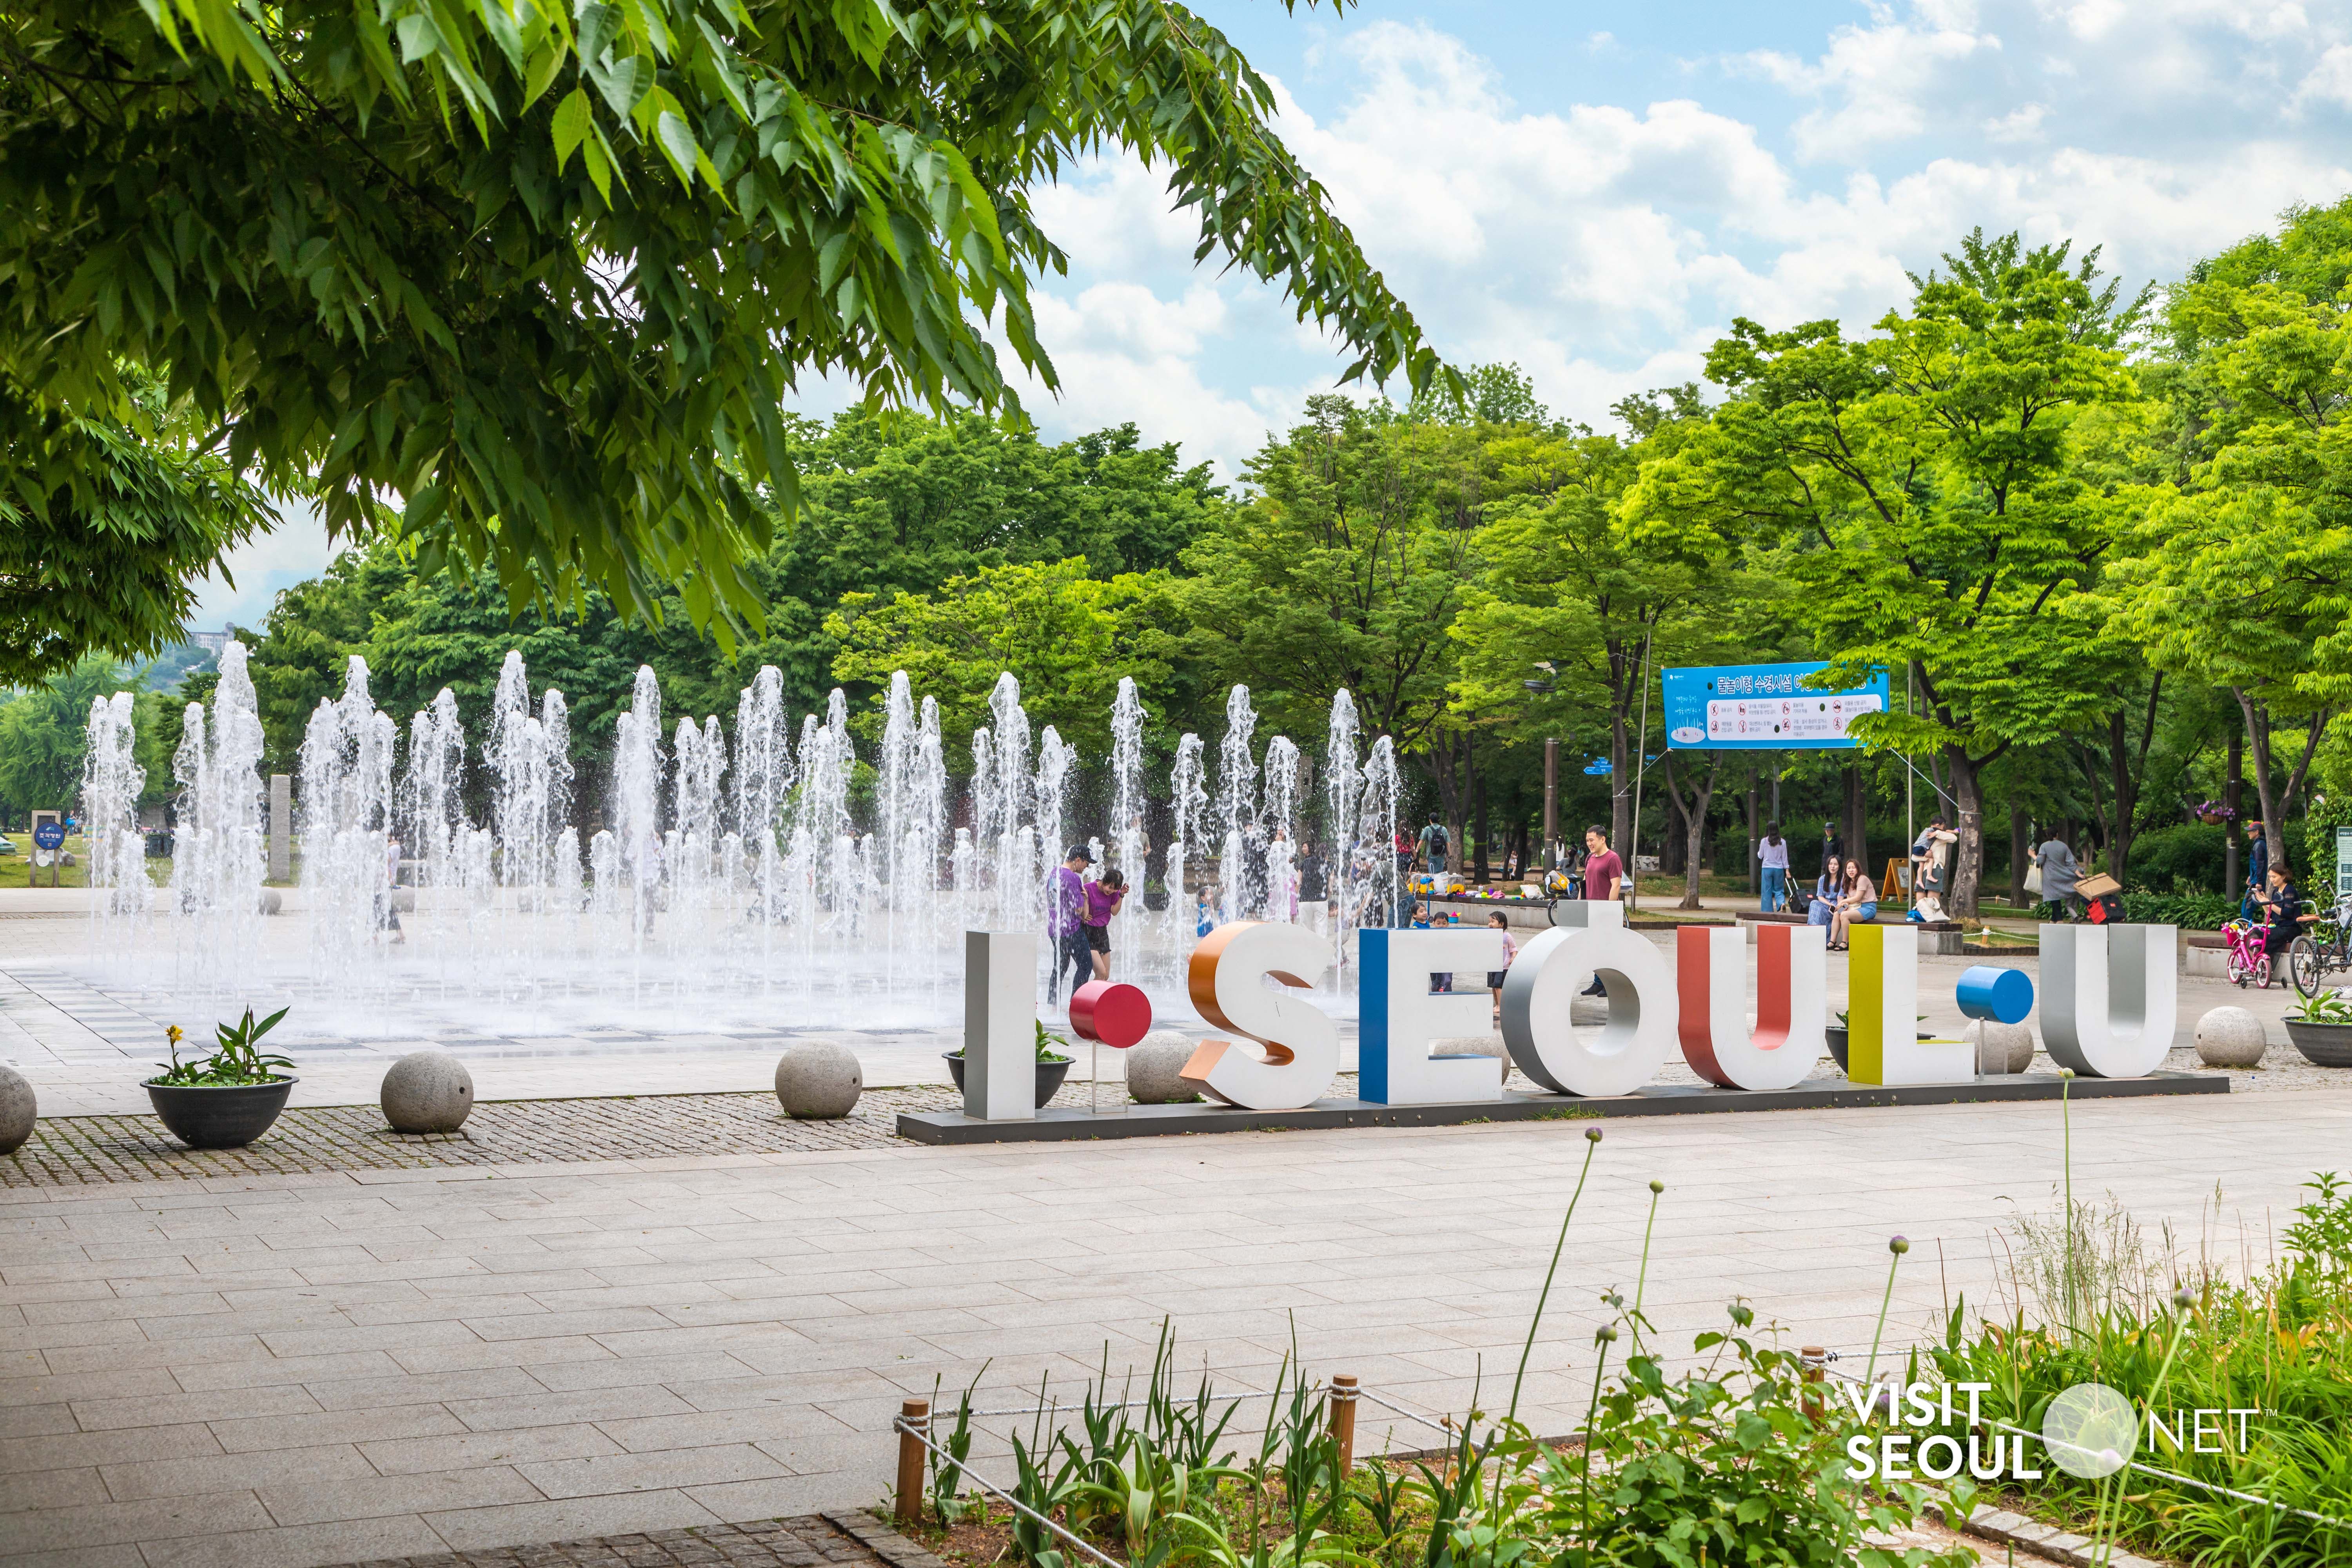 Seoul Forest4 : The exterior view of Seoul Forest looking at the Fountain